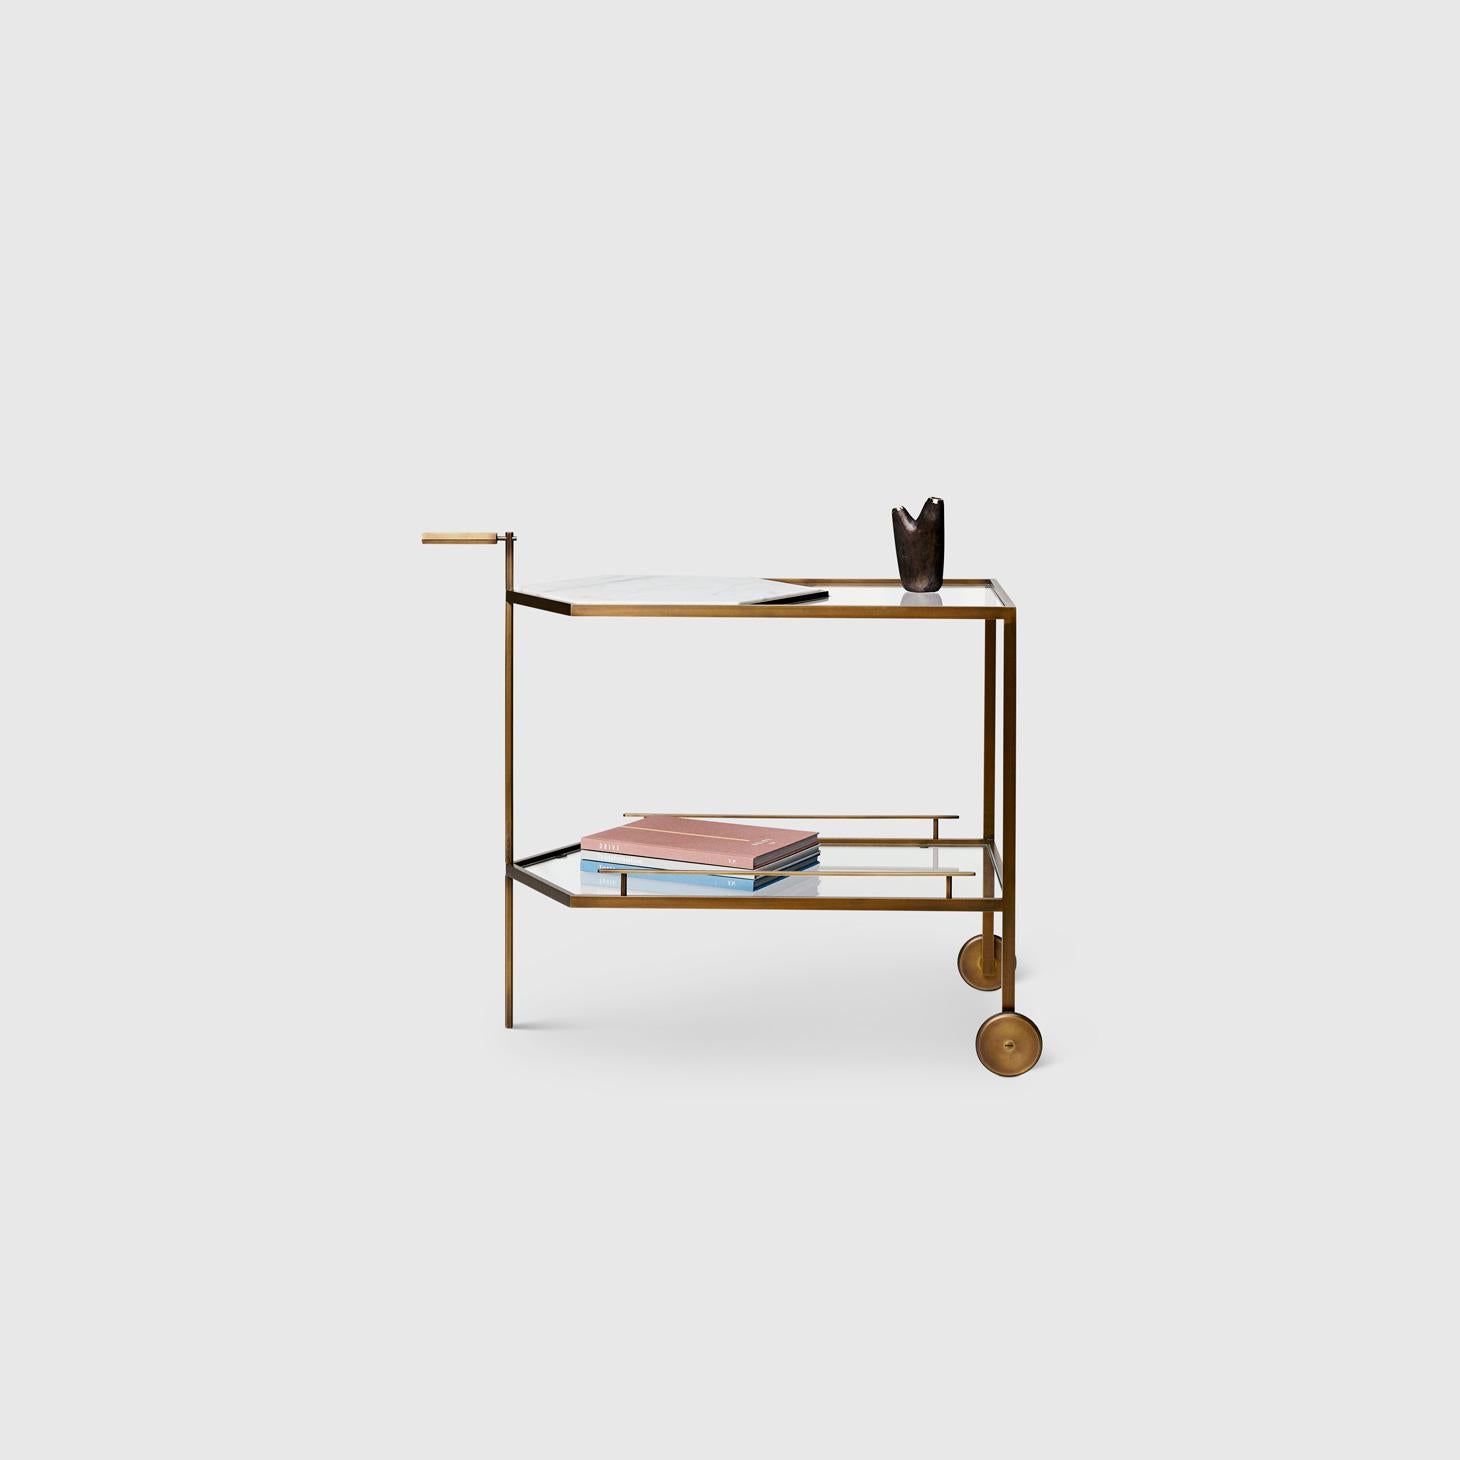 The Gin Lane bar cart by Yabu Pushelberg has a minimal profile in Smoked Bronze paired with Calacatta marble or Smoked Brass paired with Carrara marble. The simple profile takes precision craftsmanship by experts in Italy and creates a statement